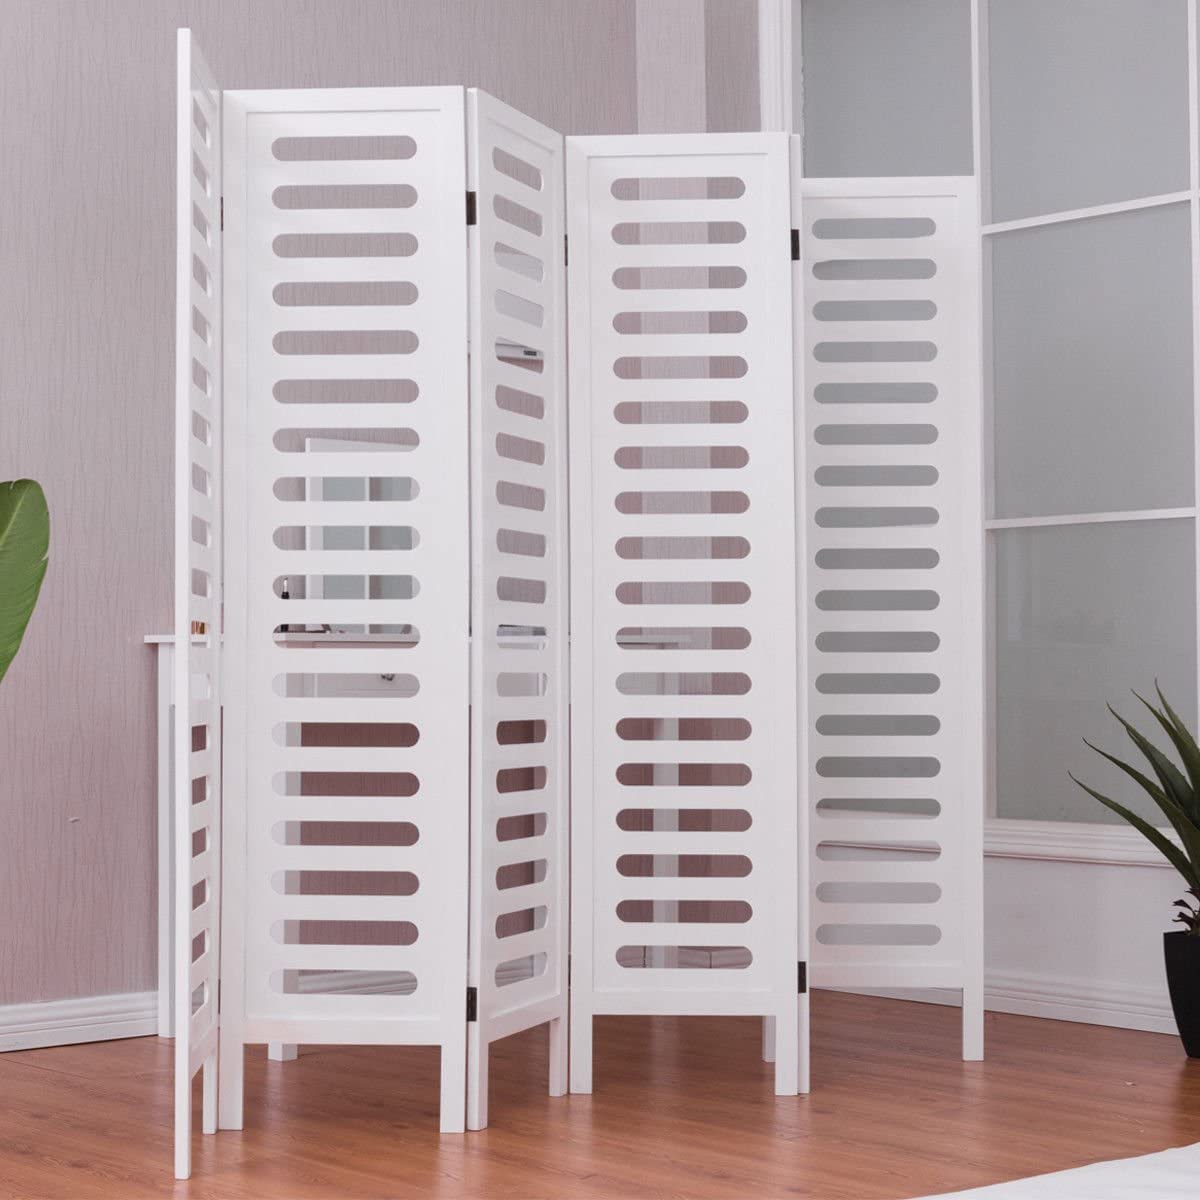 6 Panel Handicrafts Partition Wooden Room Divider Wooden Screen Wooden Separator partition for Living Room partition Screen Room Divider Consists of 6 Panels to be Placed in Zig-Zag Position